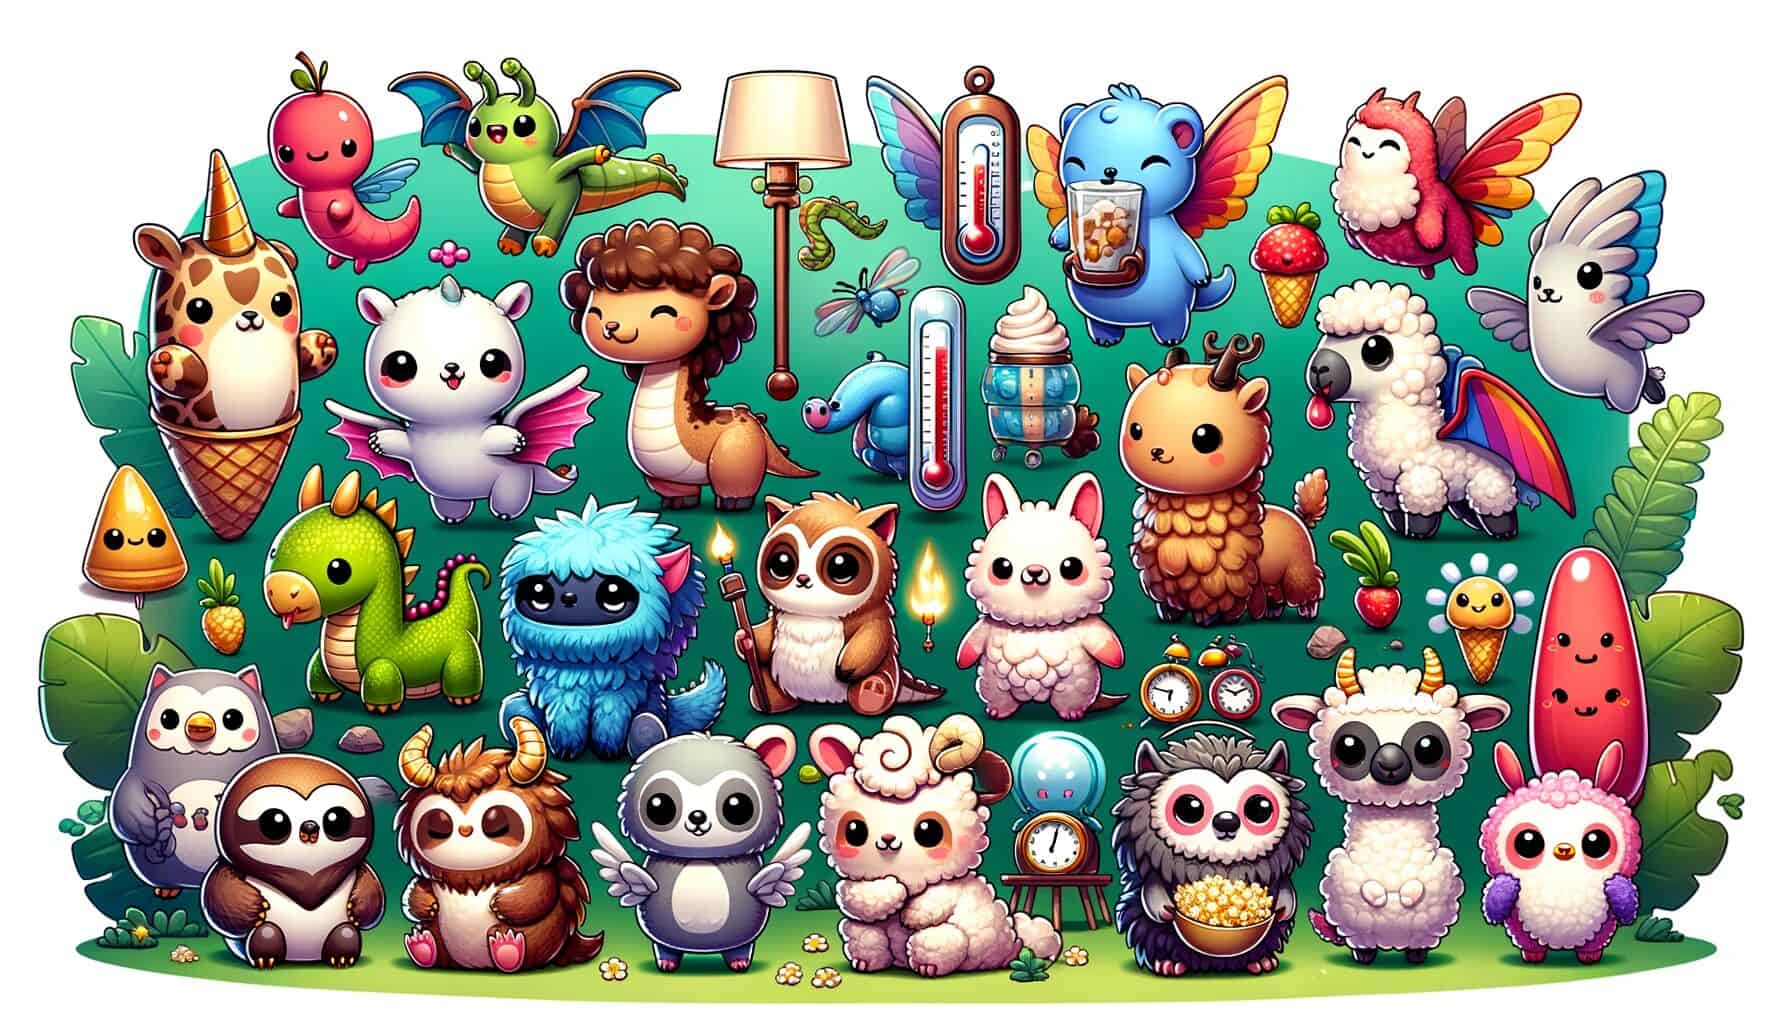 A group shotof a bunch of adorable cartoon animal characters.